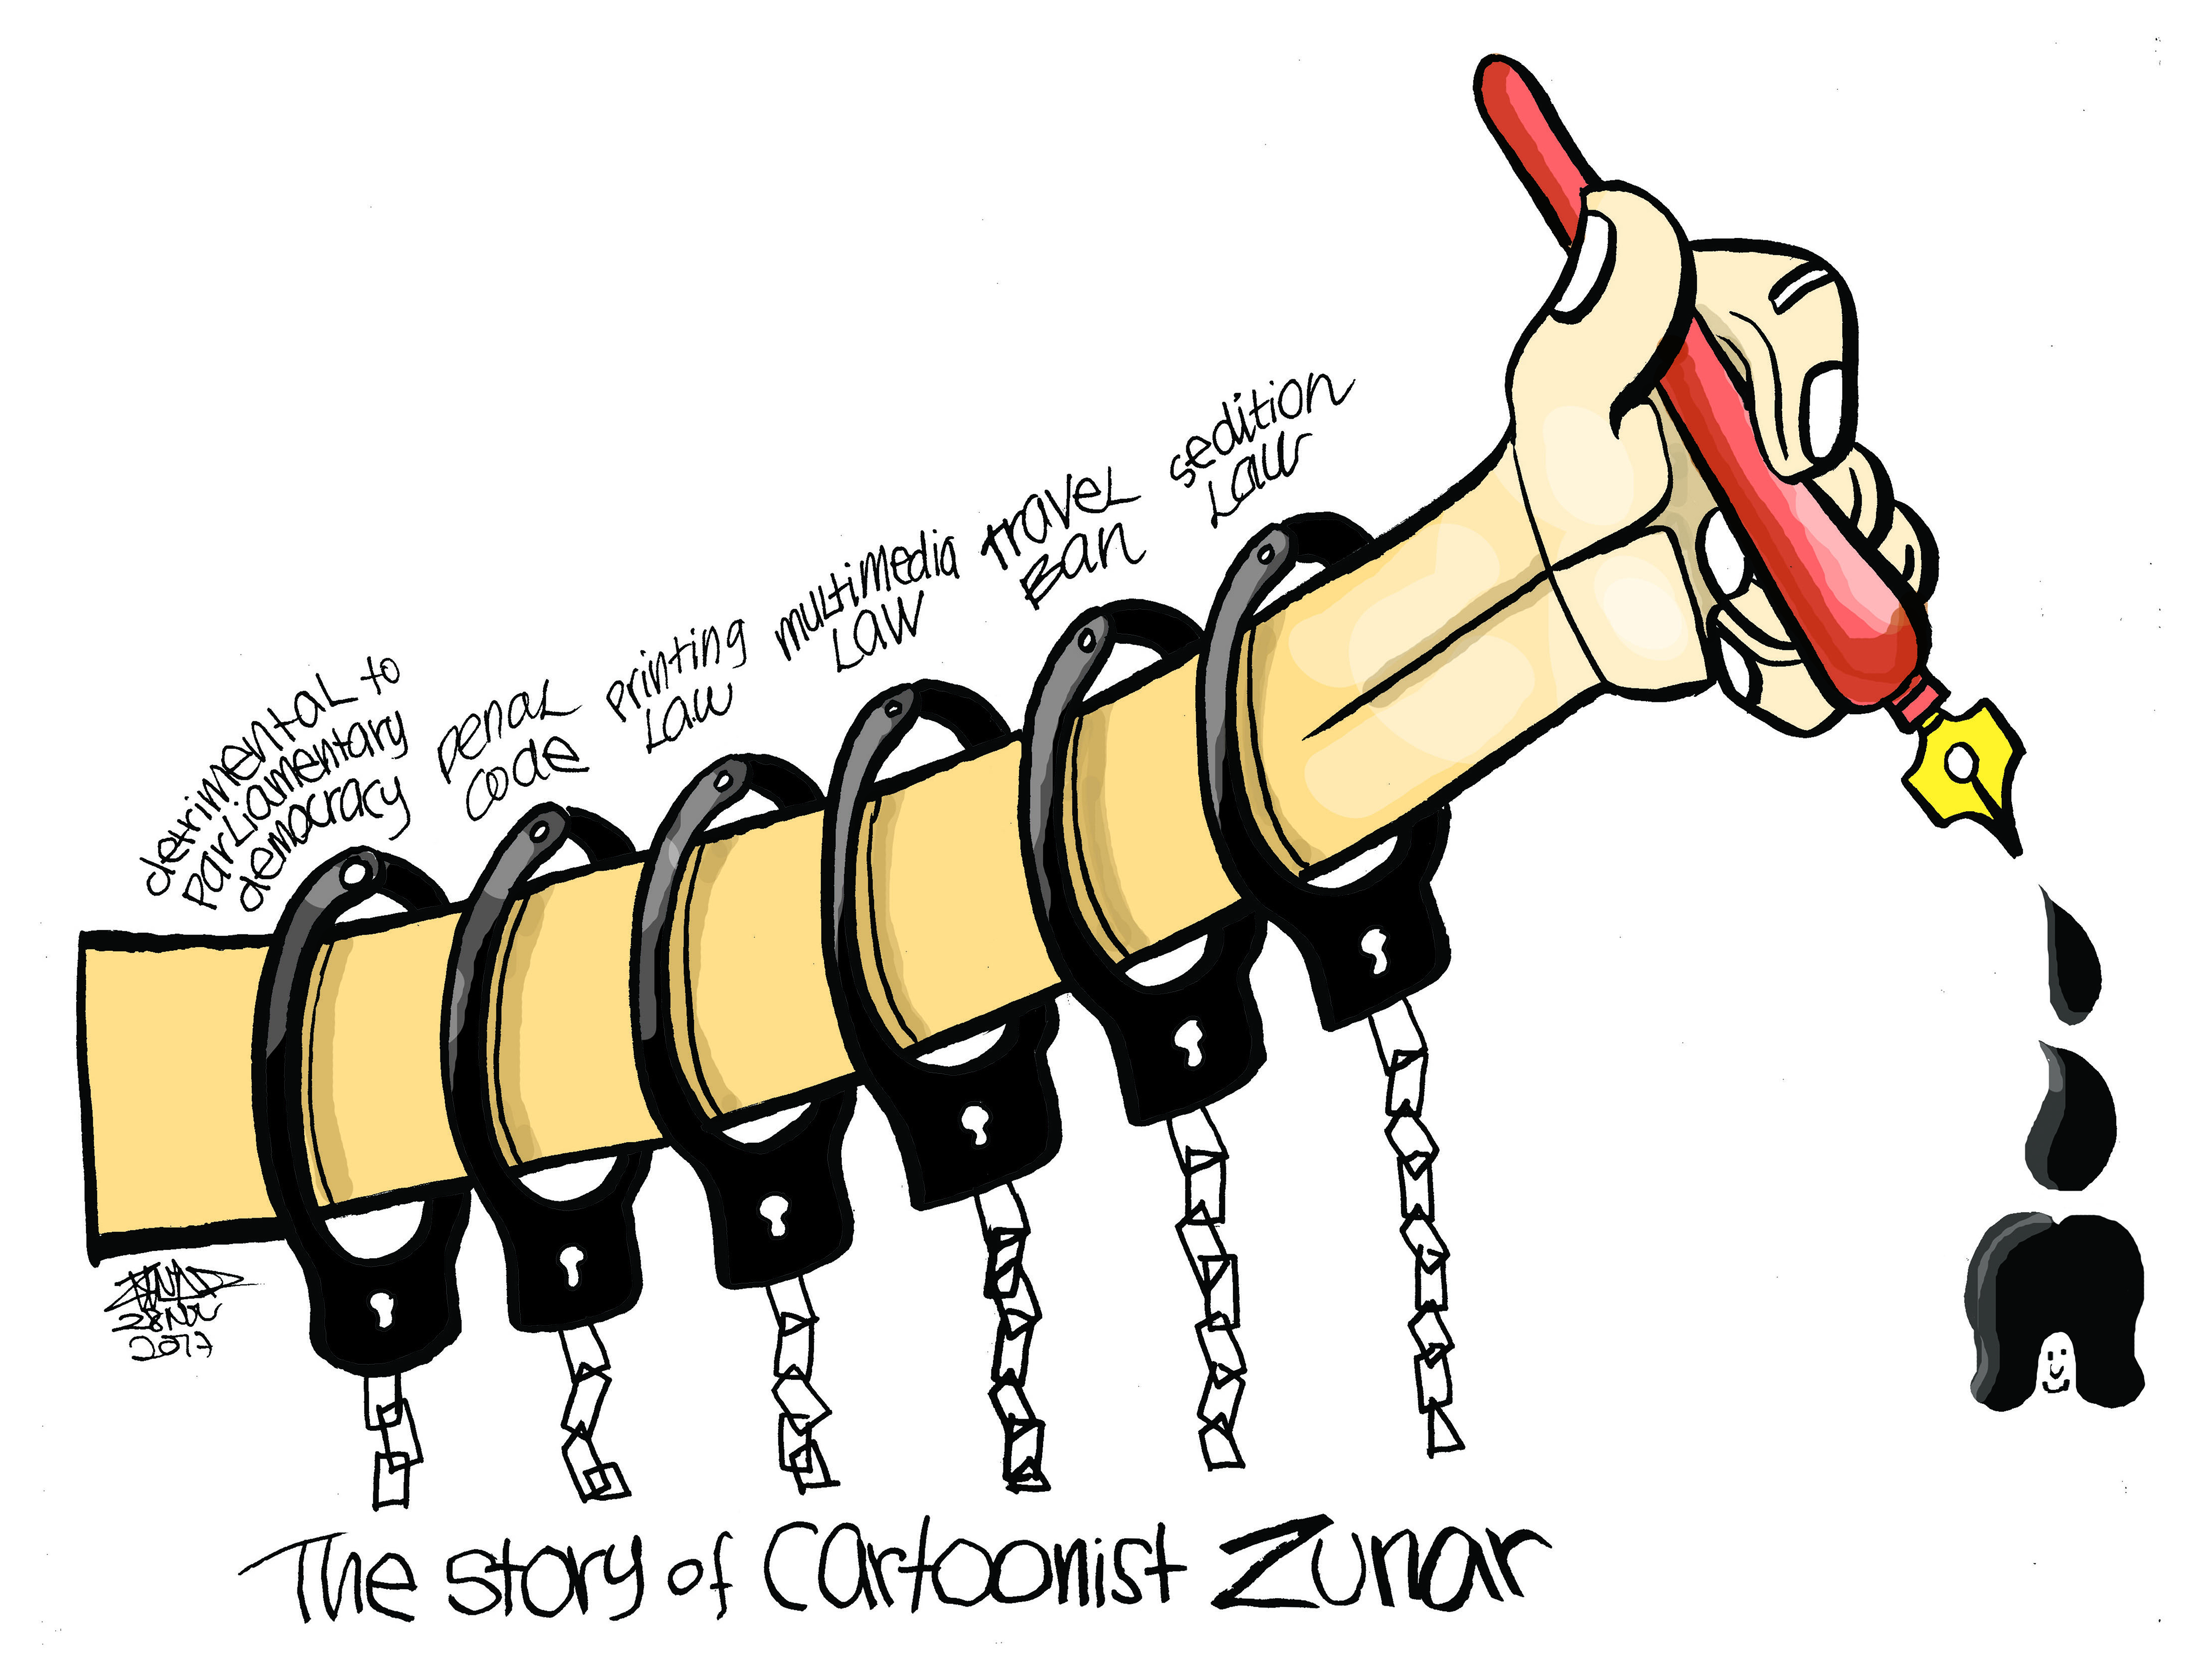 © Zunar. Courtesy of the artist. This image depicts the Malaysia Sedition Act of 1948. Originally implemented by the colonial authorities, this act criminalizes ‘seditious speech’, and has been used to crack down on anti-corruption activists.